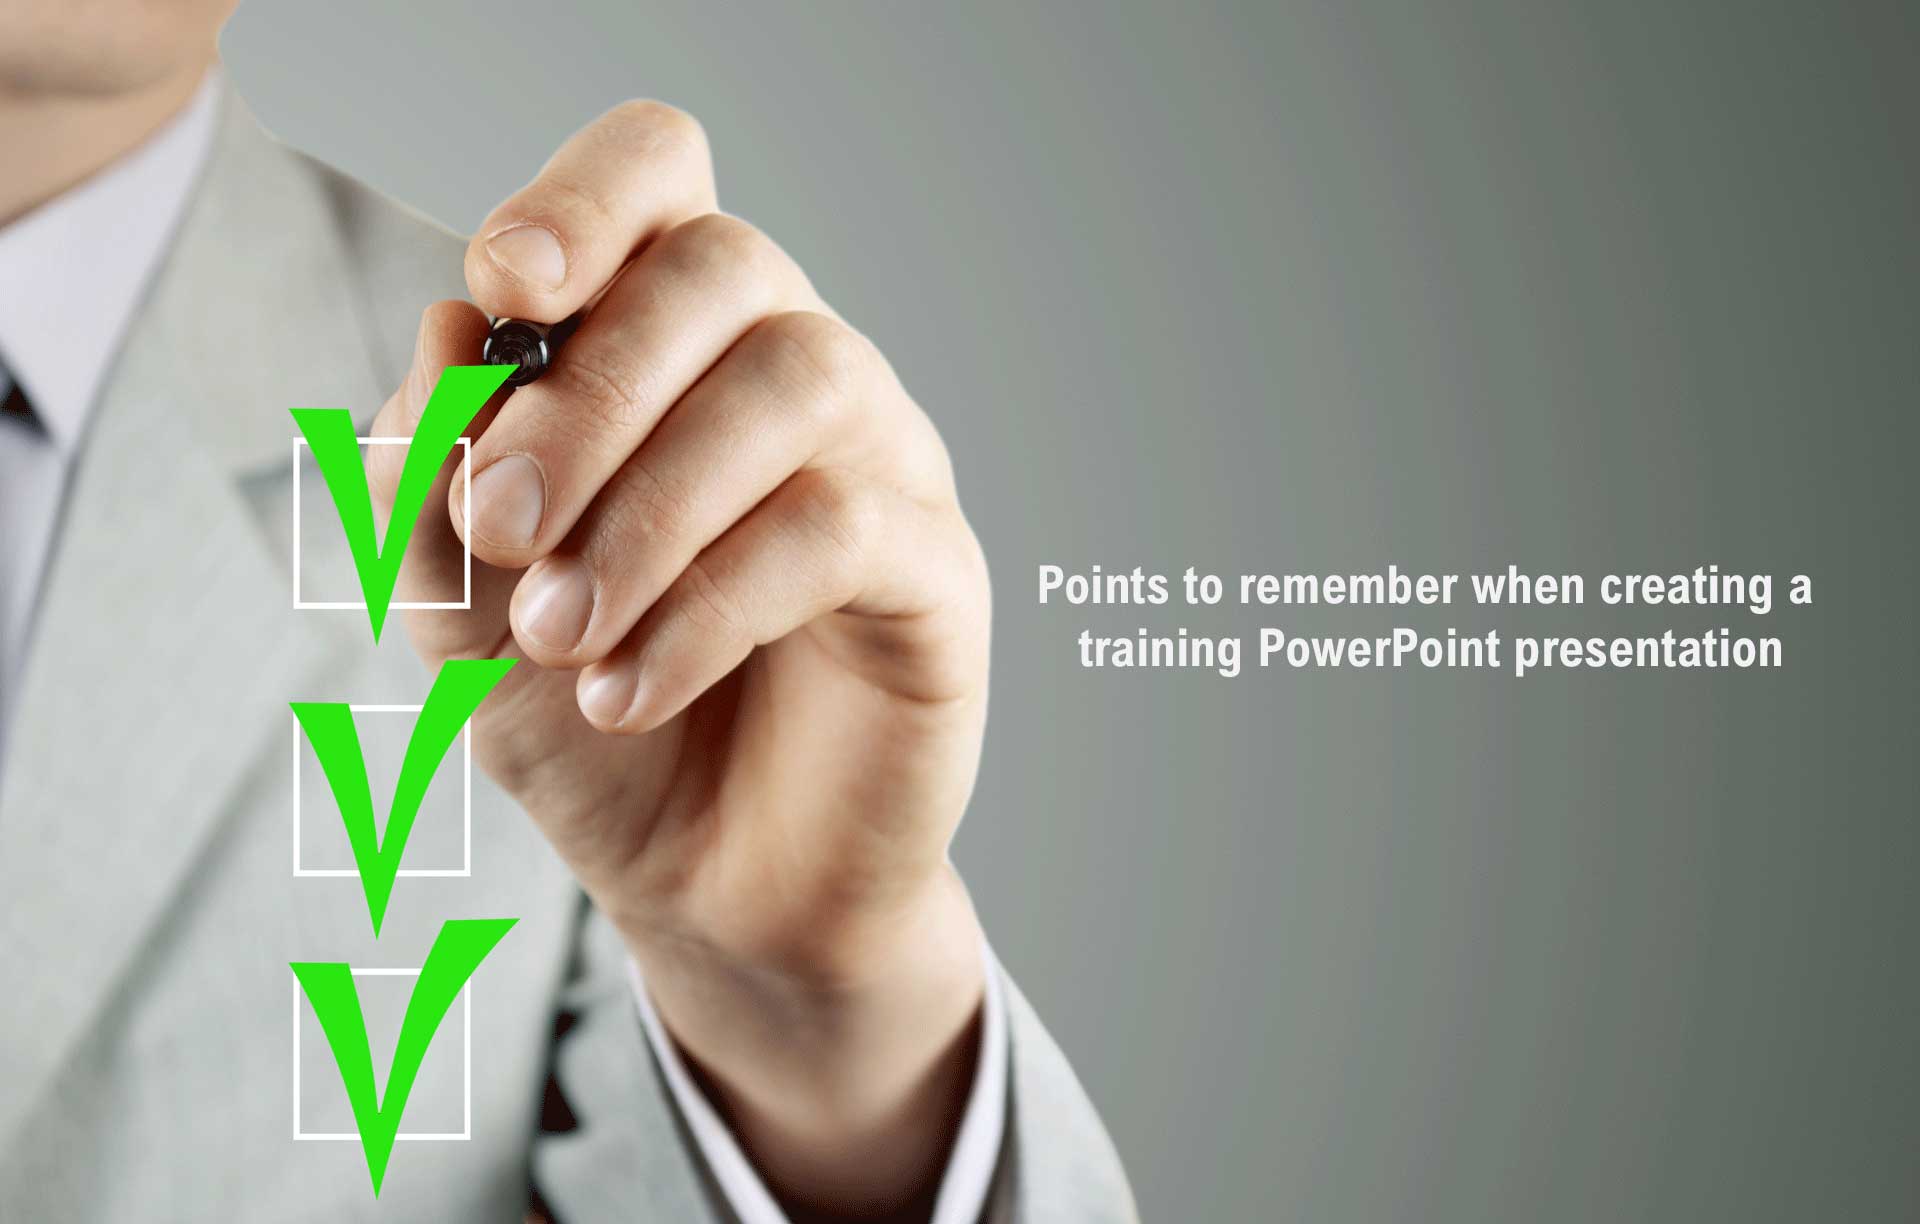 Points to remember when creating a training PowerPoint presentation - Mybusiness visual